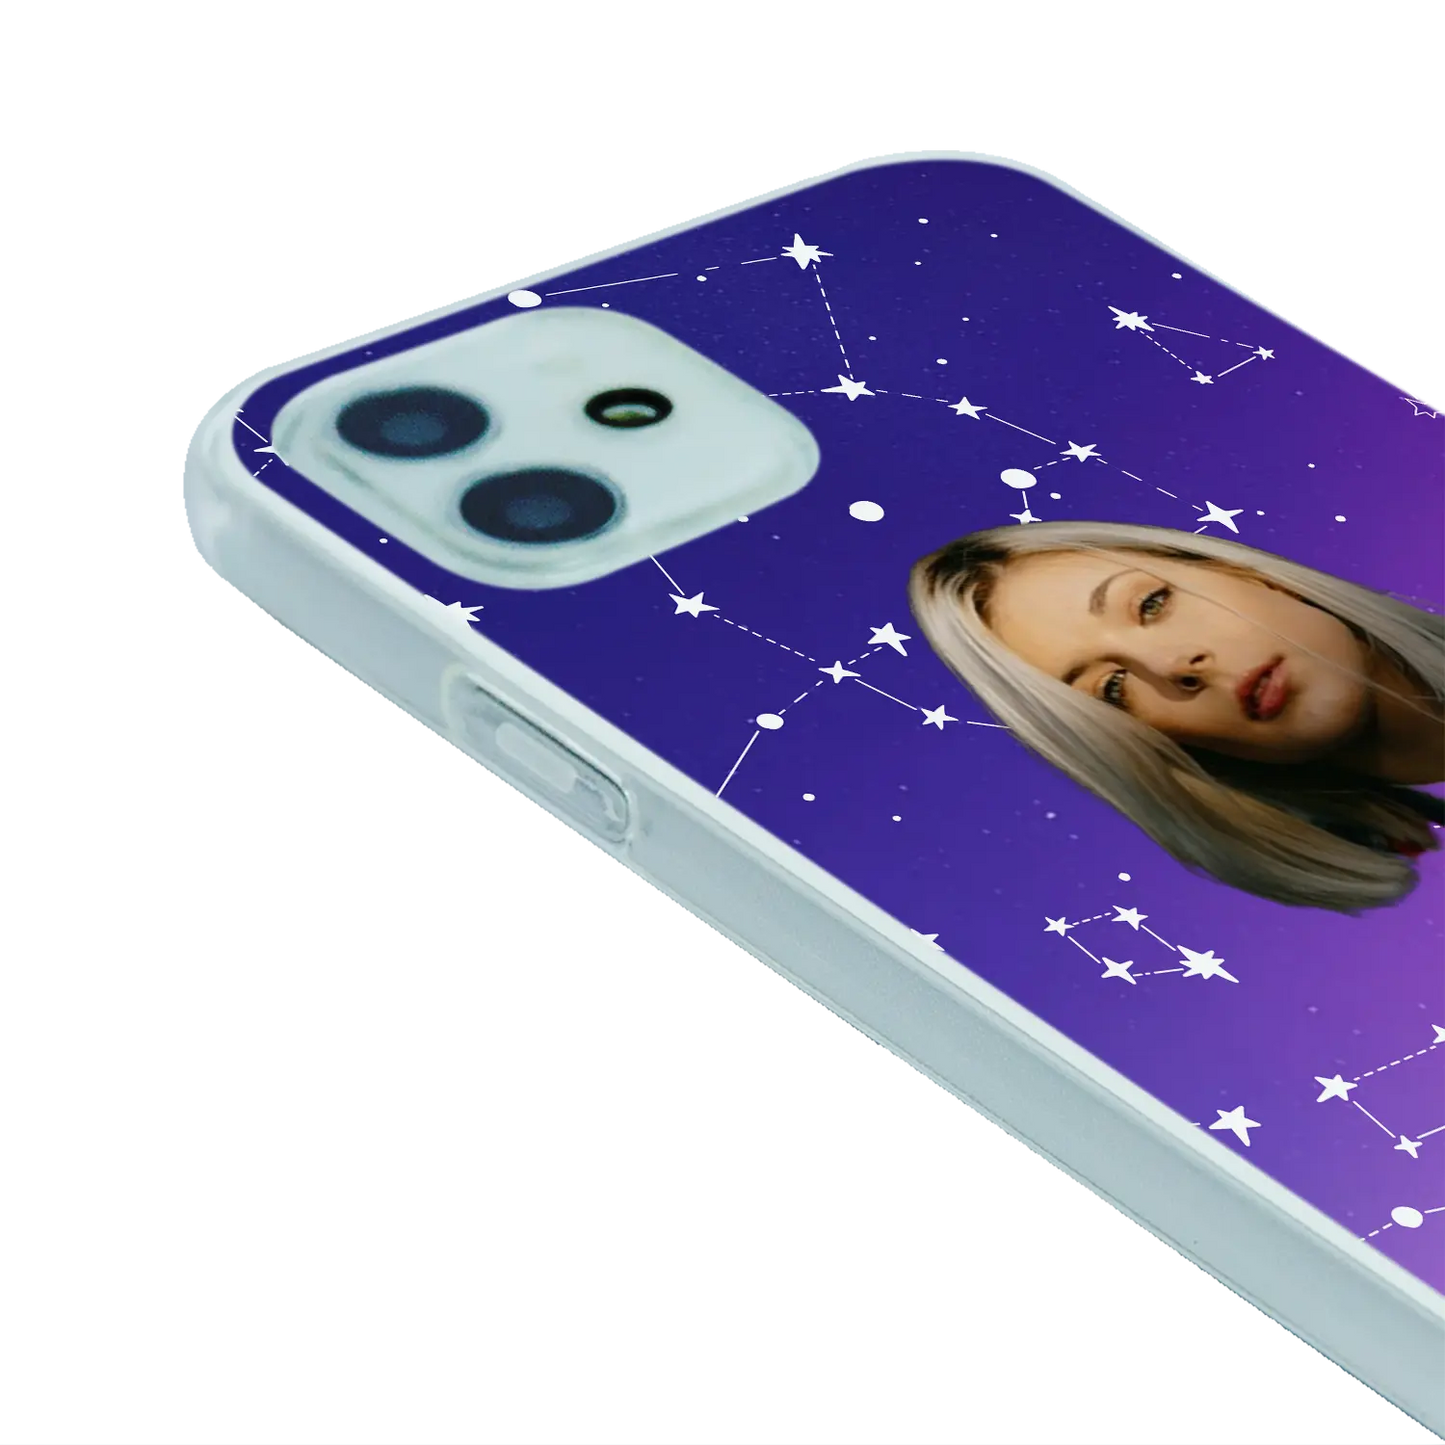 Let’s Face It - Constellations - Personalised iPhone Case